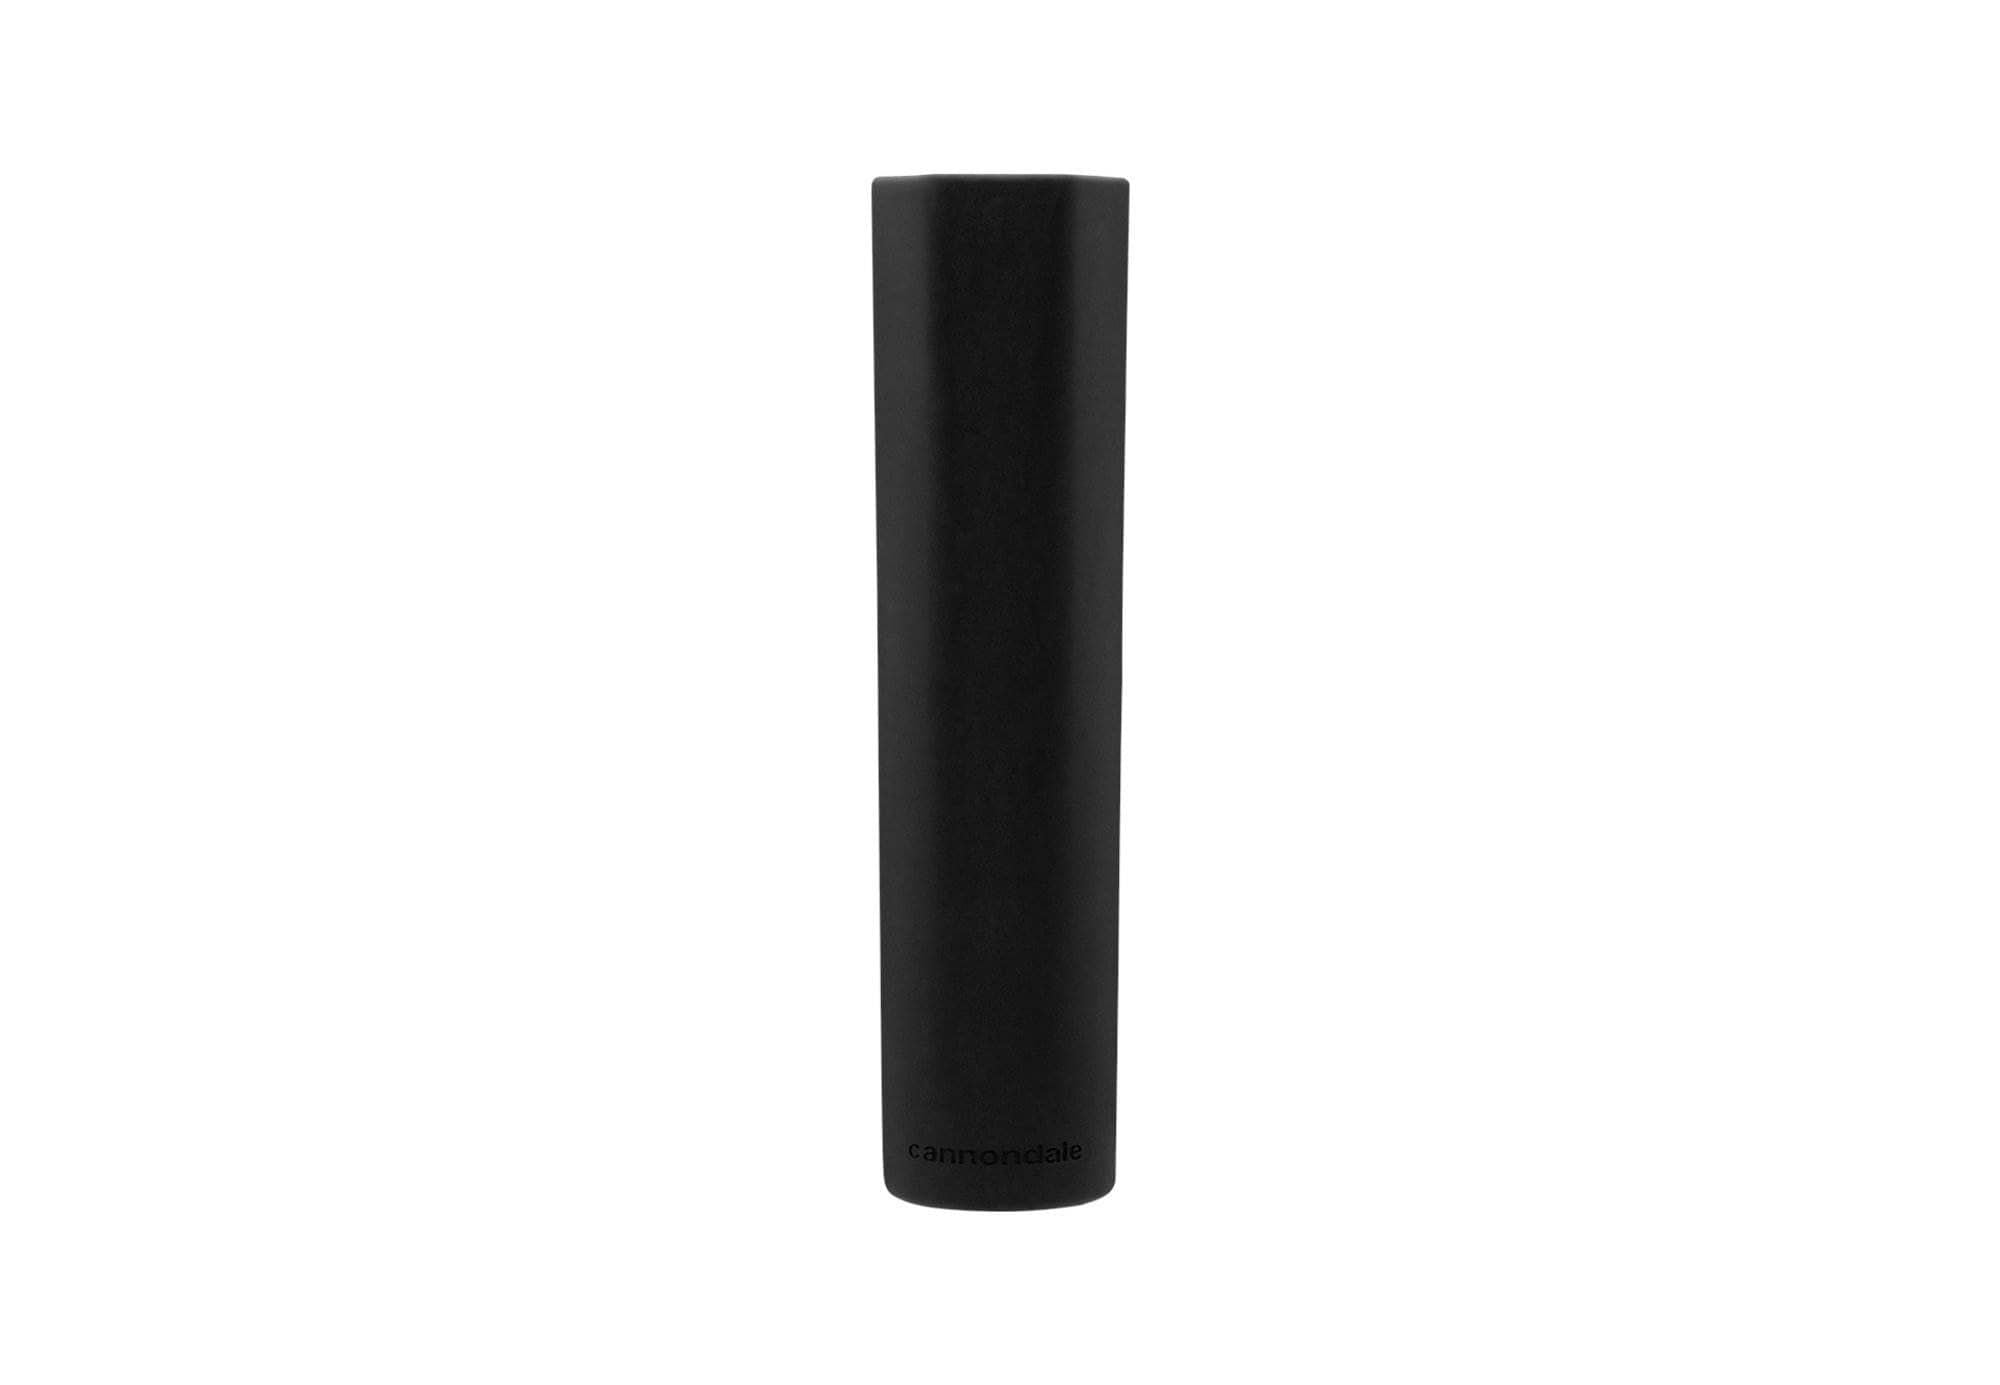 Cannondale Cannondale XC-Silicone Grips Black